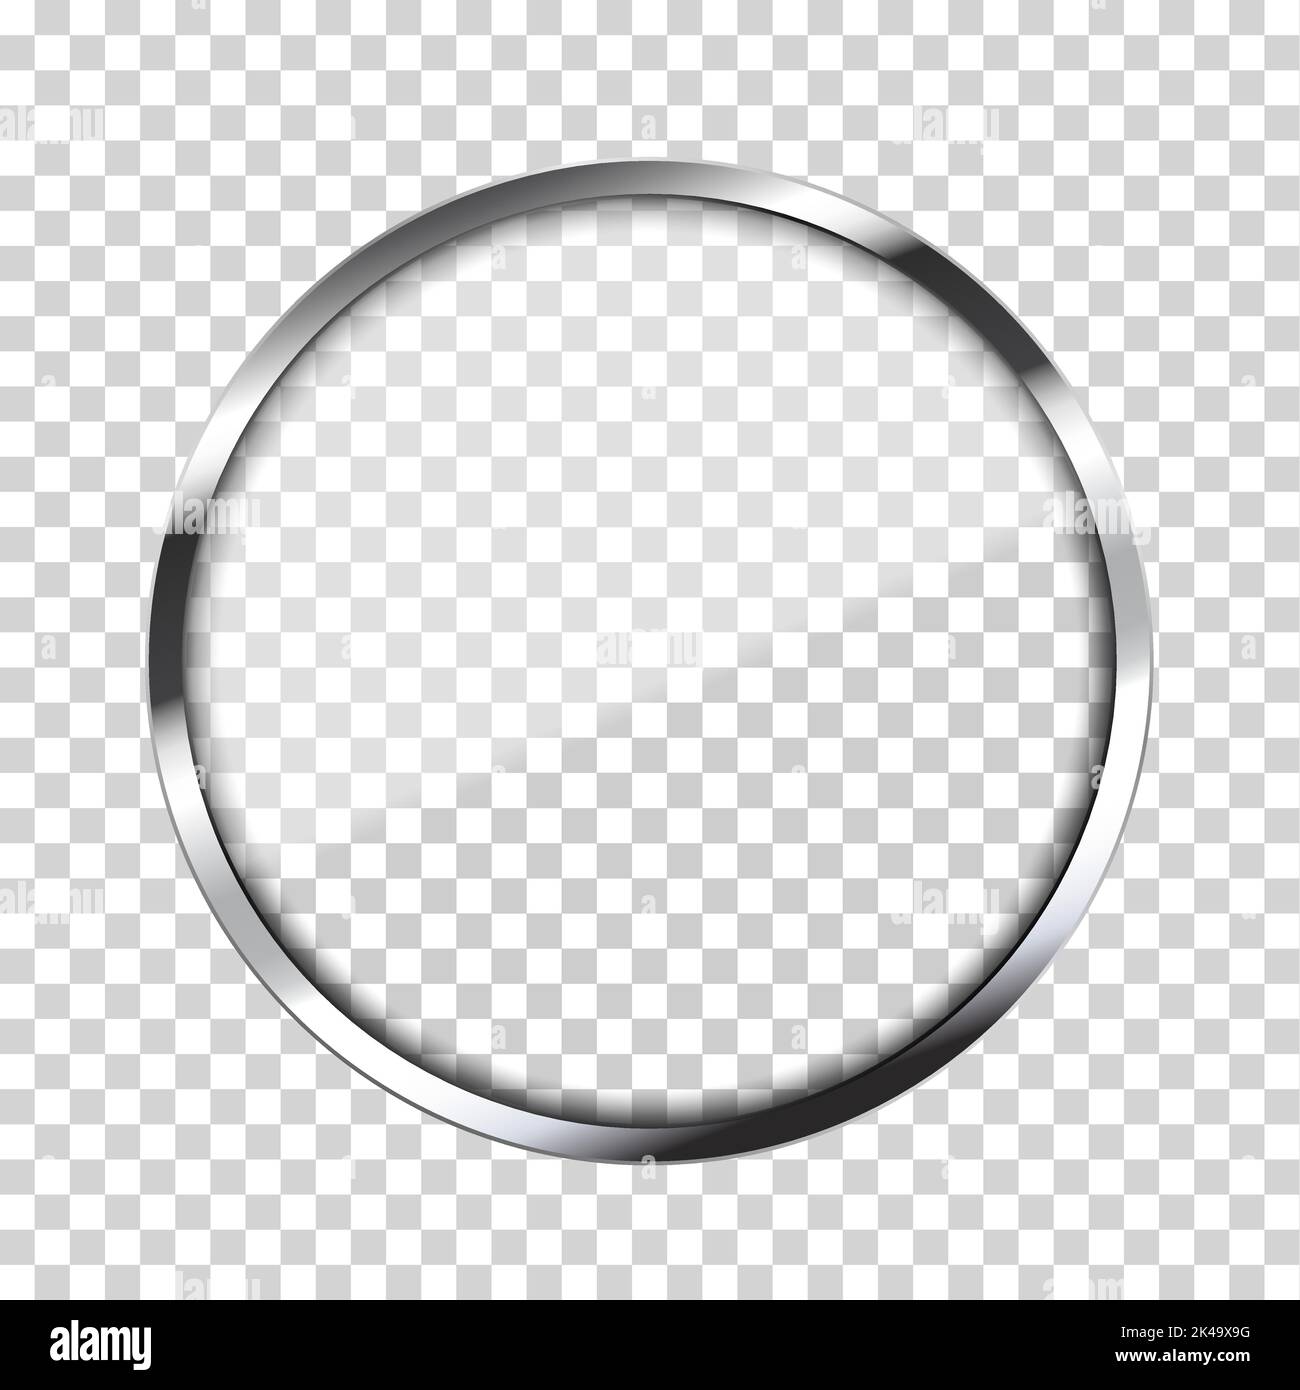 Realistic round metal frame with reflections, shadow and cover glass. Chrome or silver material - vector Stock Vector